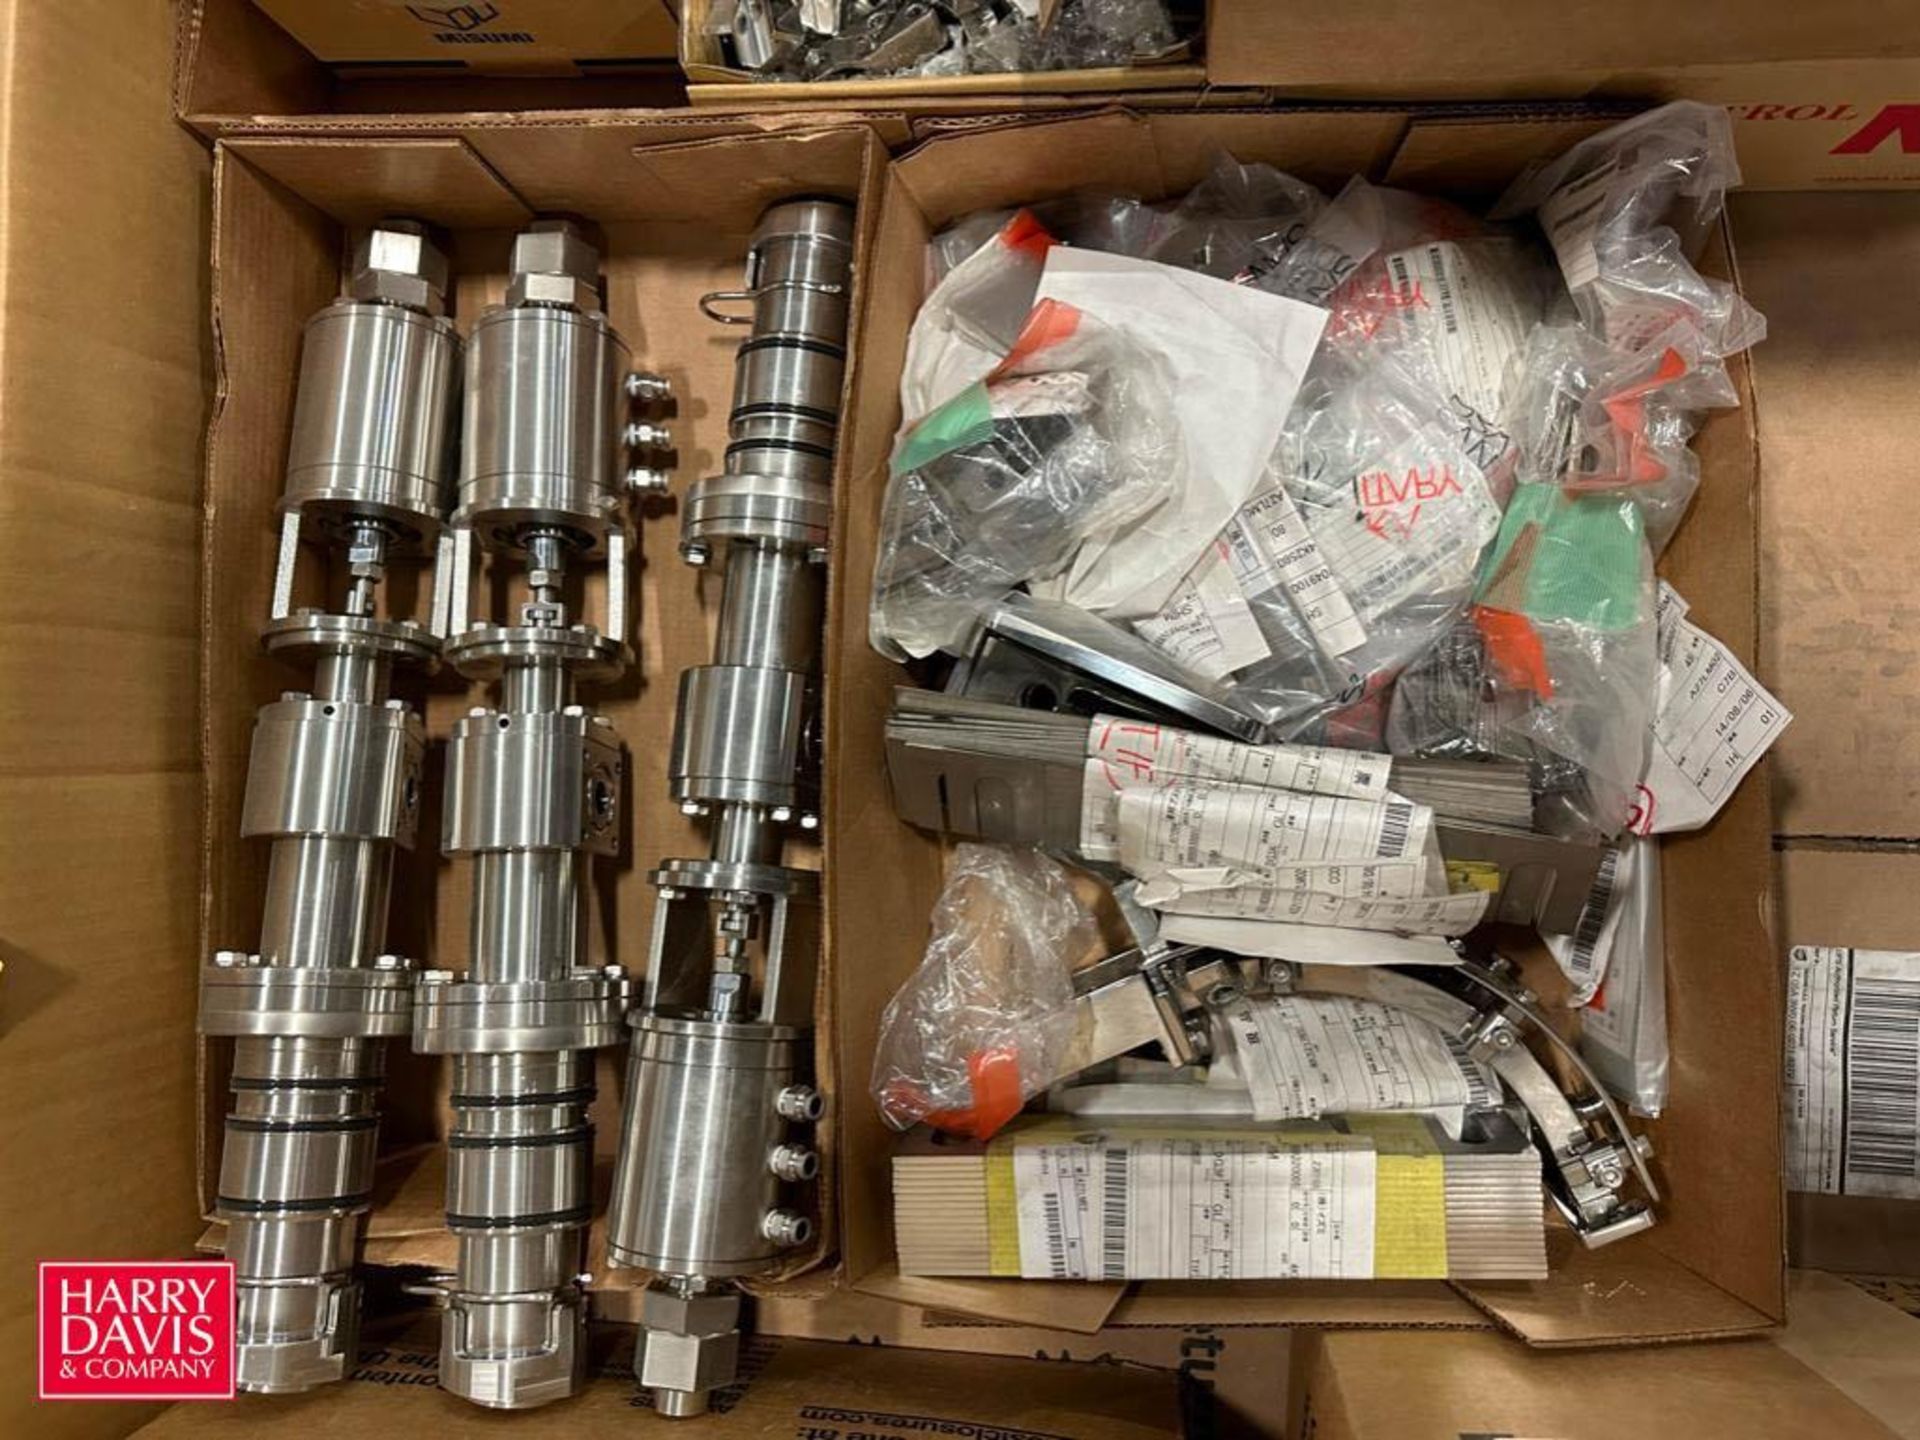 NEW Asst Parts, Including: S/S Cap Chute Sections, Sidel Spindles, Filler Heads, Shims and Caps - Image 3 of 5